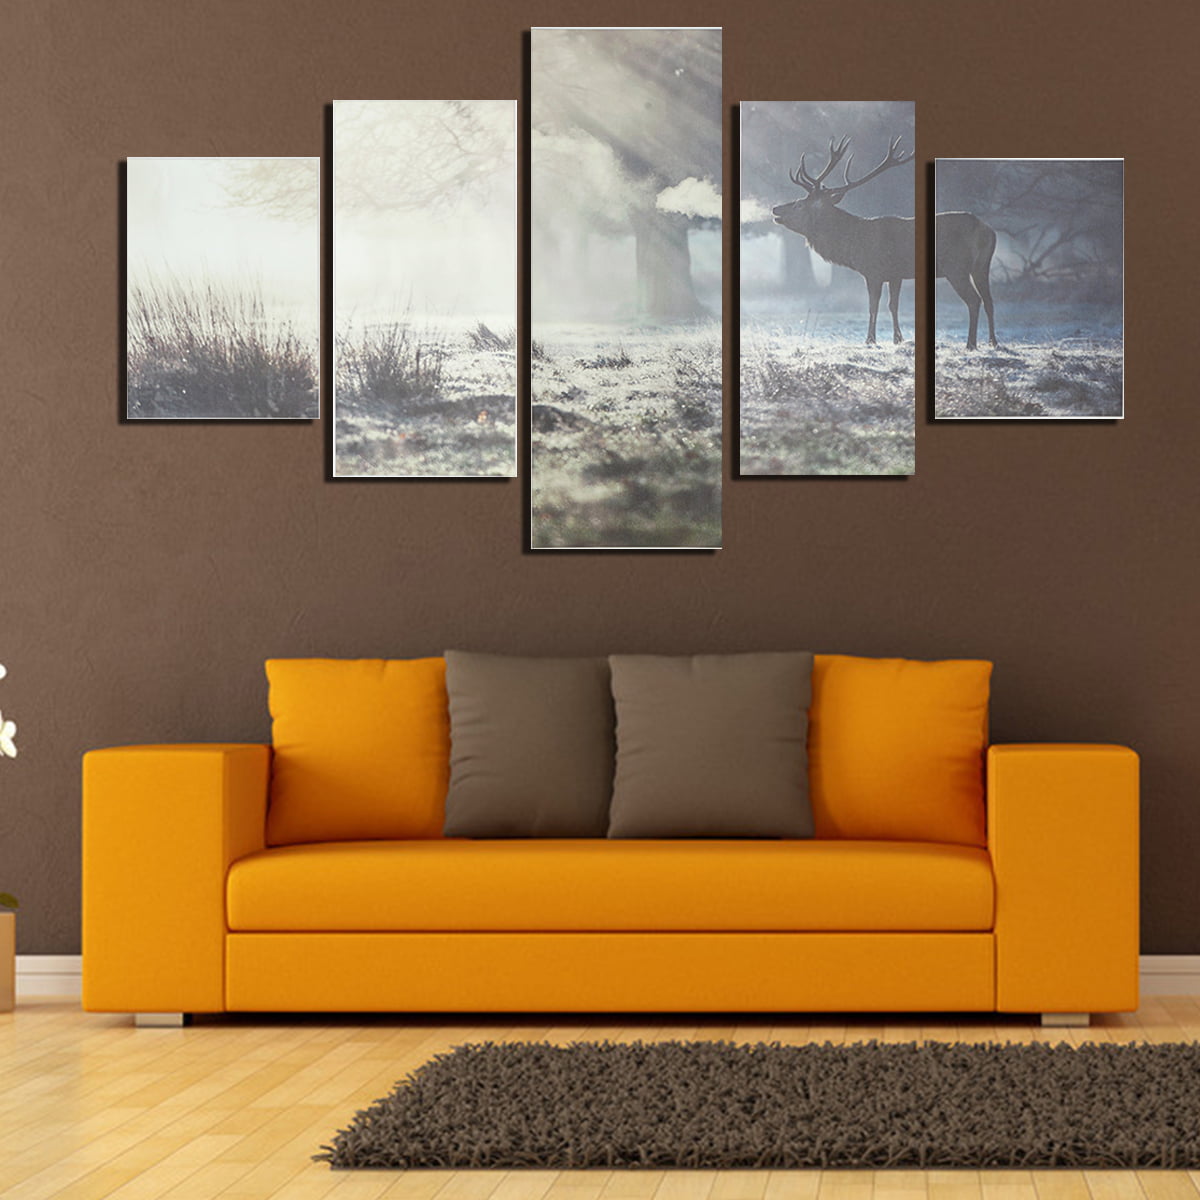 Wall poster decoration for living room Canvas painting home decoration Unframed 